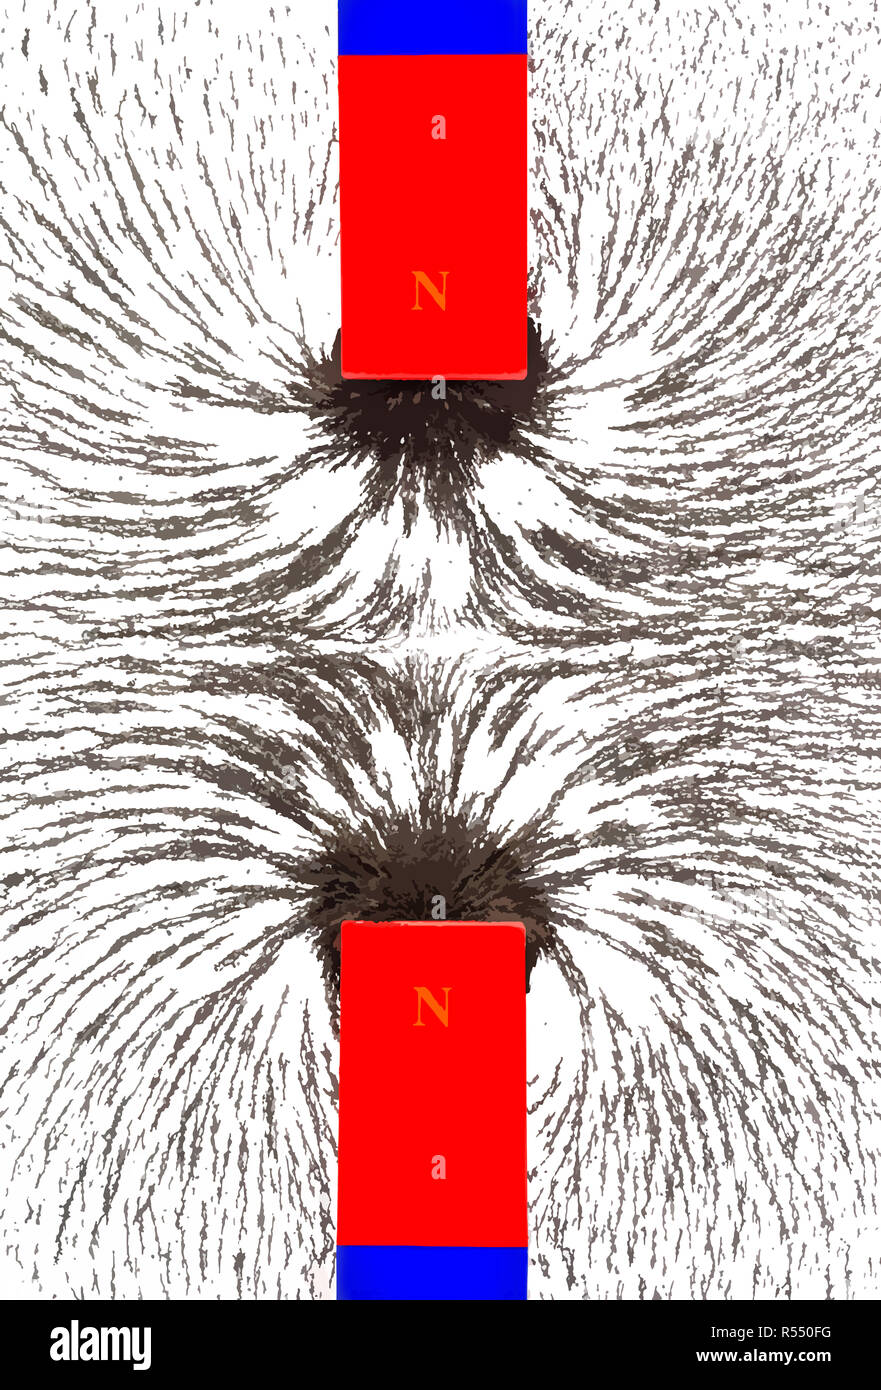 Magnetic repulsion, illustration. Iron filings show the interaction of magnetic fields when similar poles of two bar magnets are brought together. Stock Photo